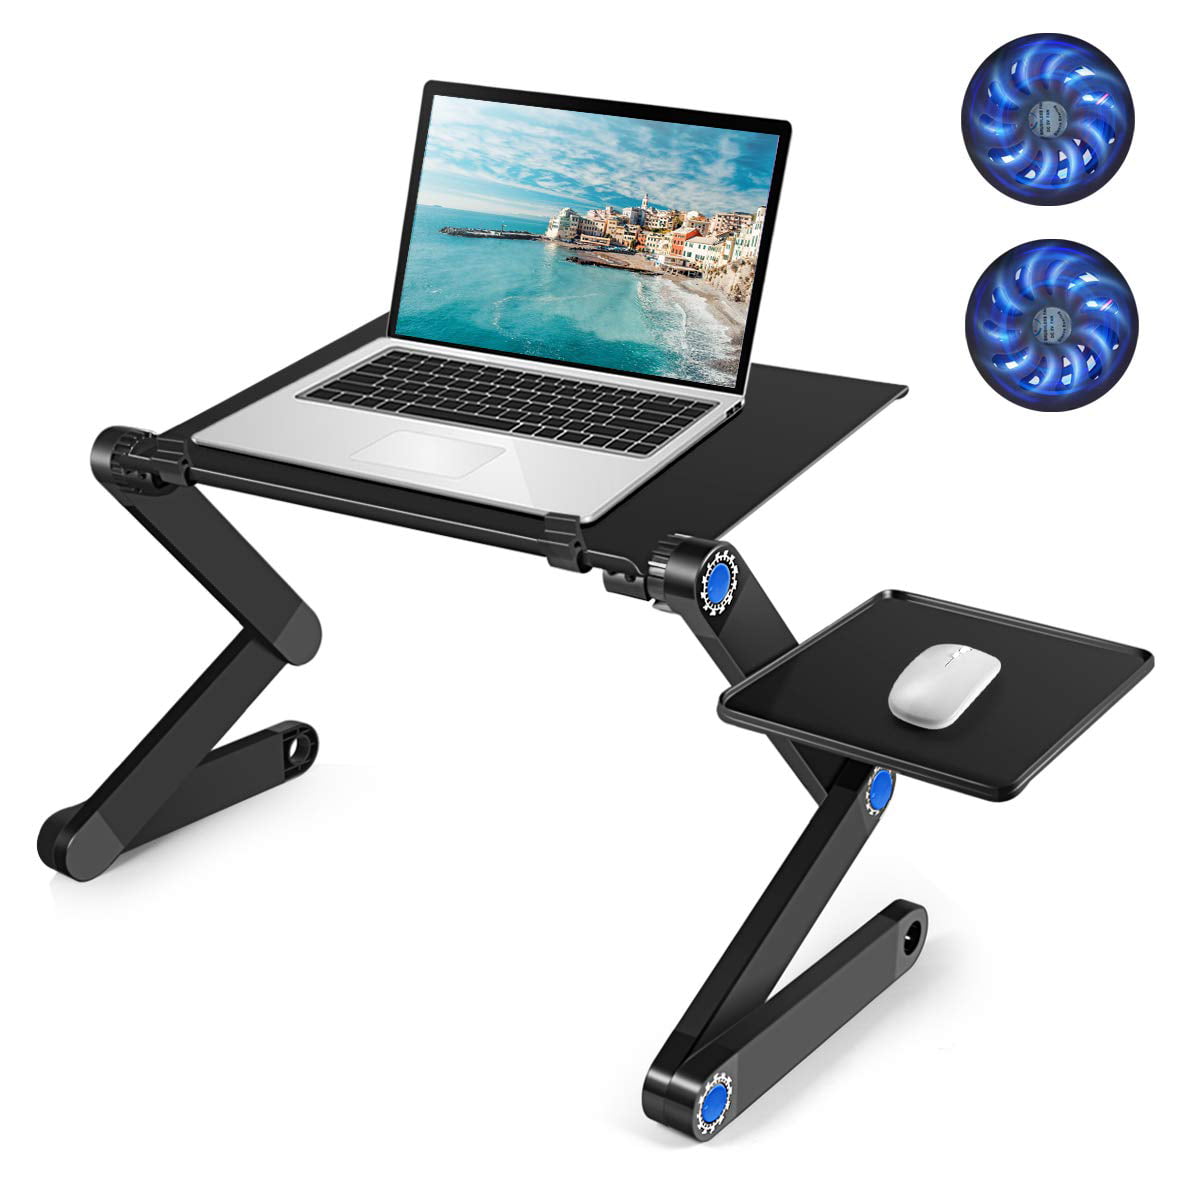 Portable Laptop Stand Desk Table Tray on sofa bed Cooling Fan With Mouse 